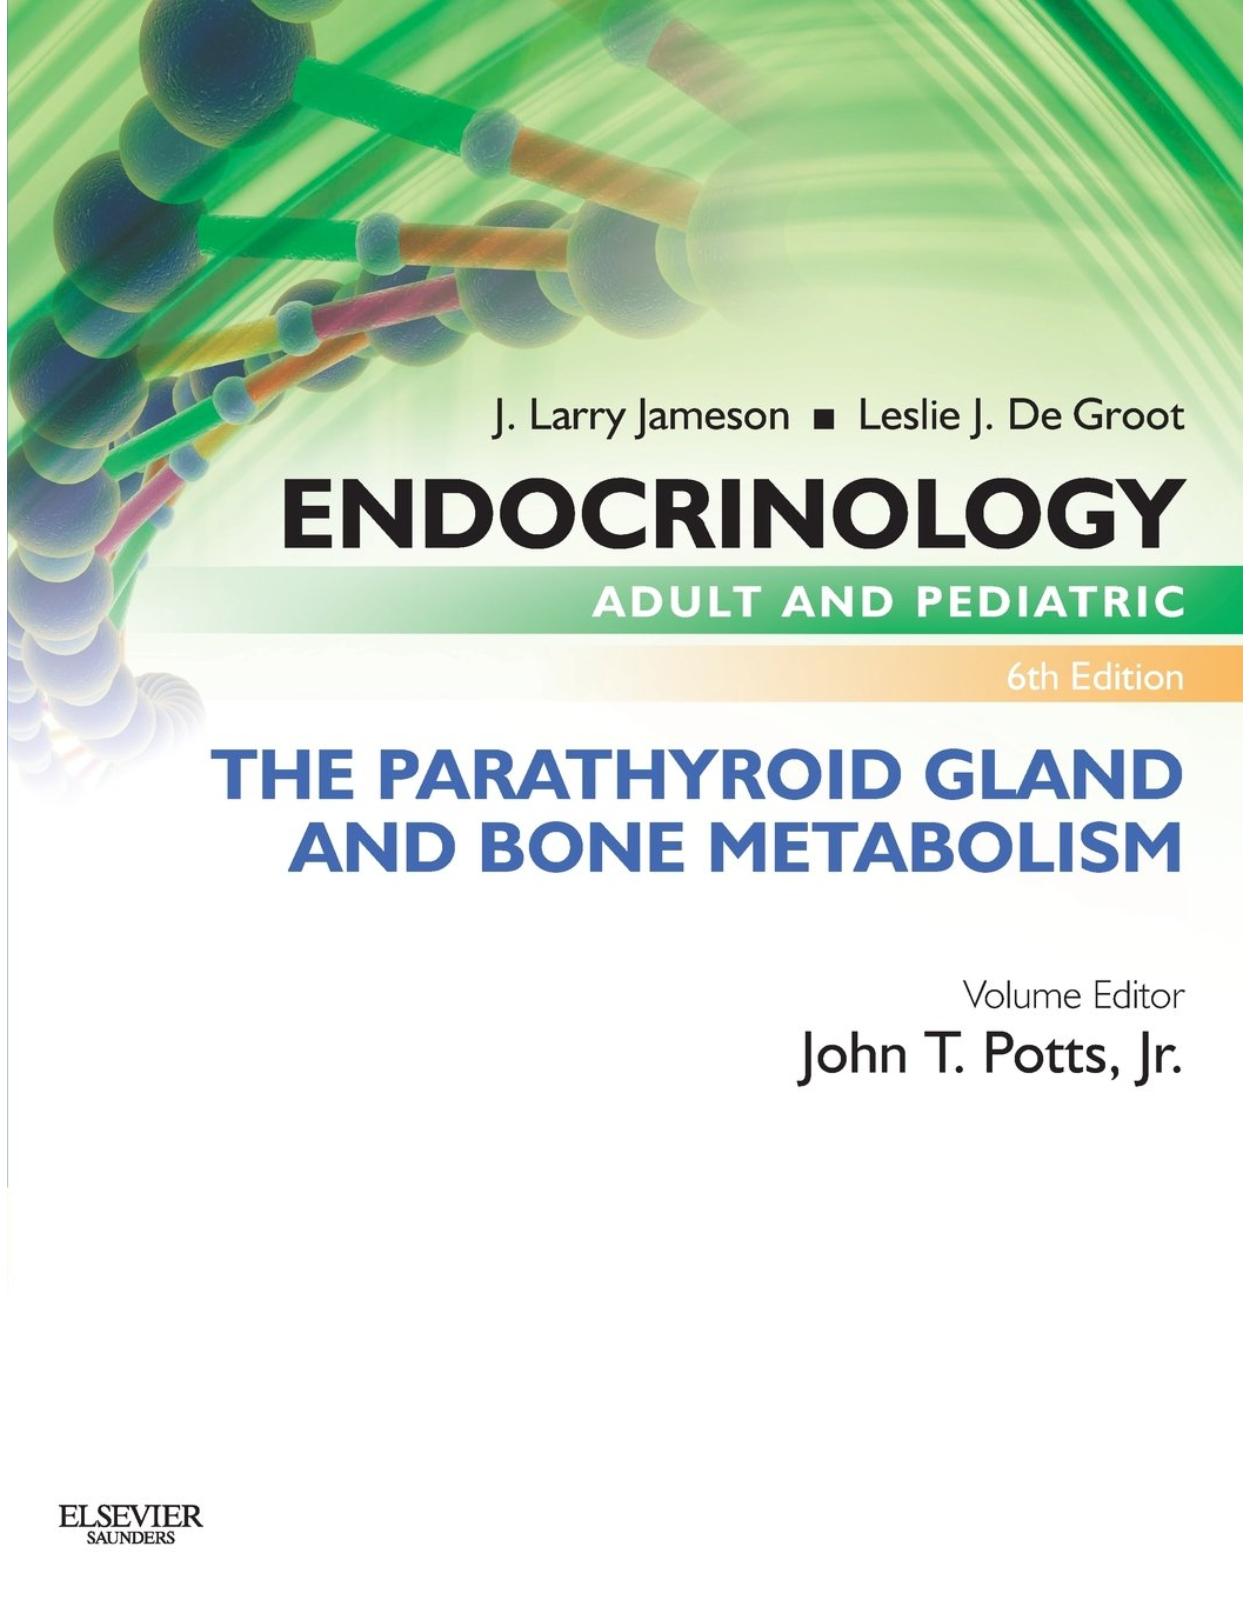 Endocrinology Adult and Pediatric: The Parathyroid Gland and Bone Metabolism, 6th Edition